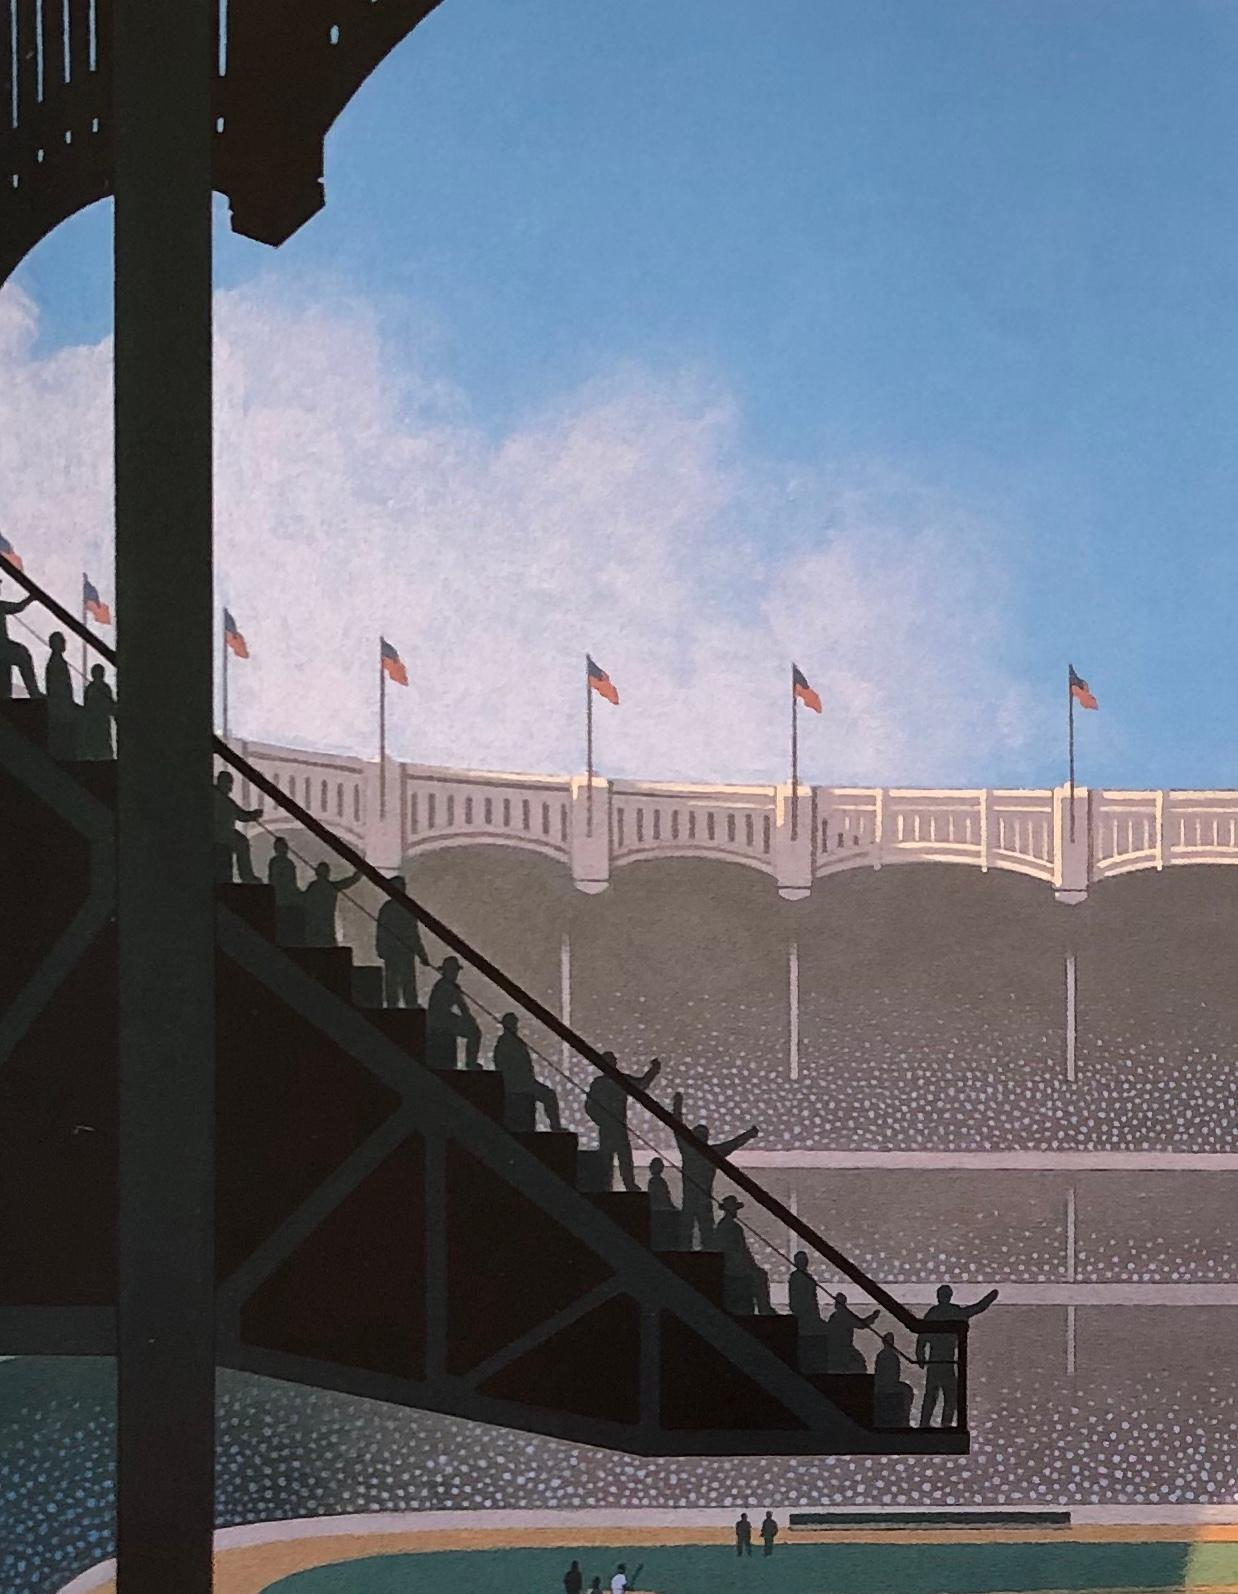 YANKEE STADIUM. Original painting by LYNN CURLEE
Acrylic on stretched canvas. Gallery wrapped with painted edges.
This painting was used as an illustration in
BALLPARK, THE STORY OF AMERICA’S BASEBALL FIELDS
Atheneum Books for Young Readers,